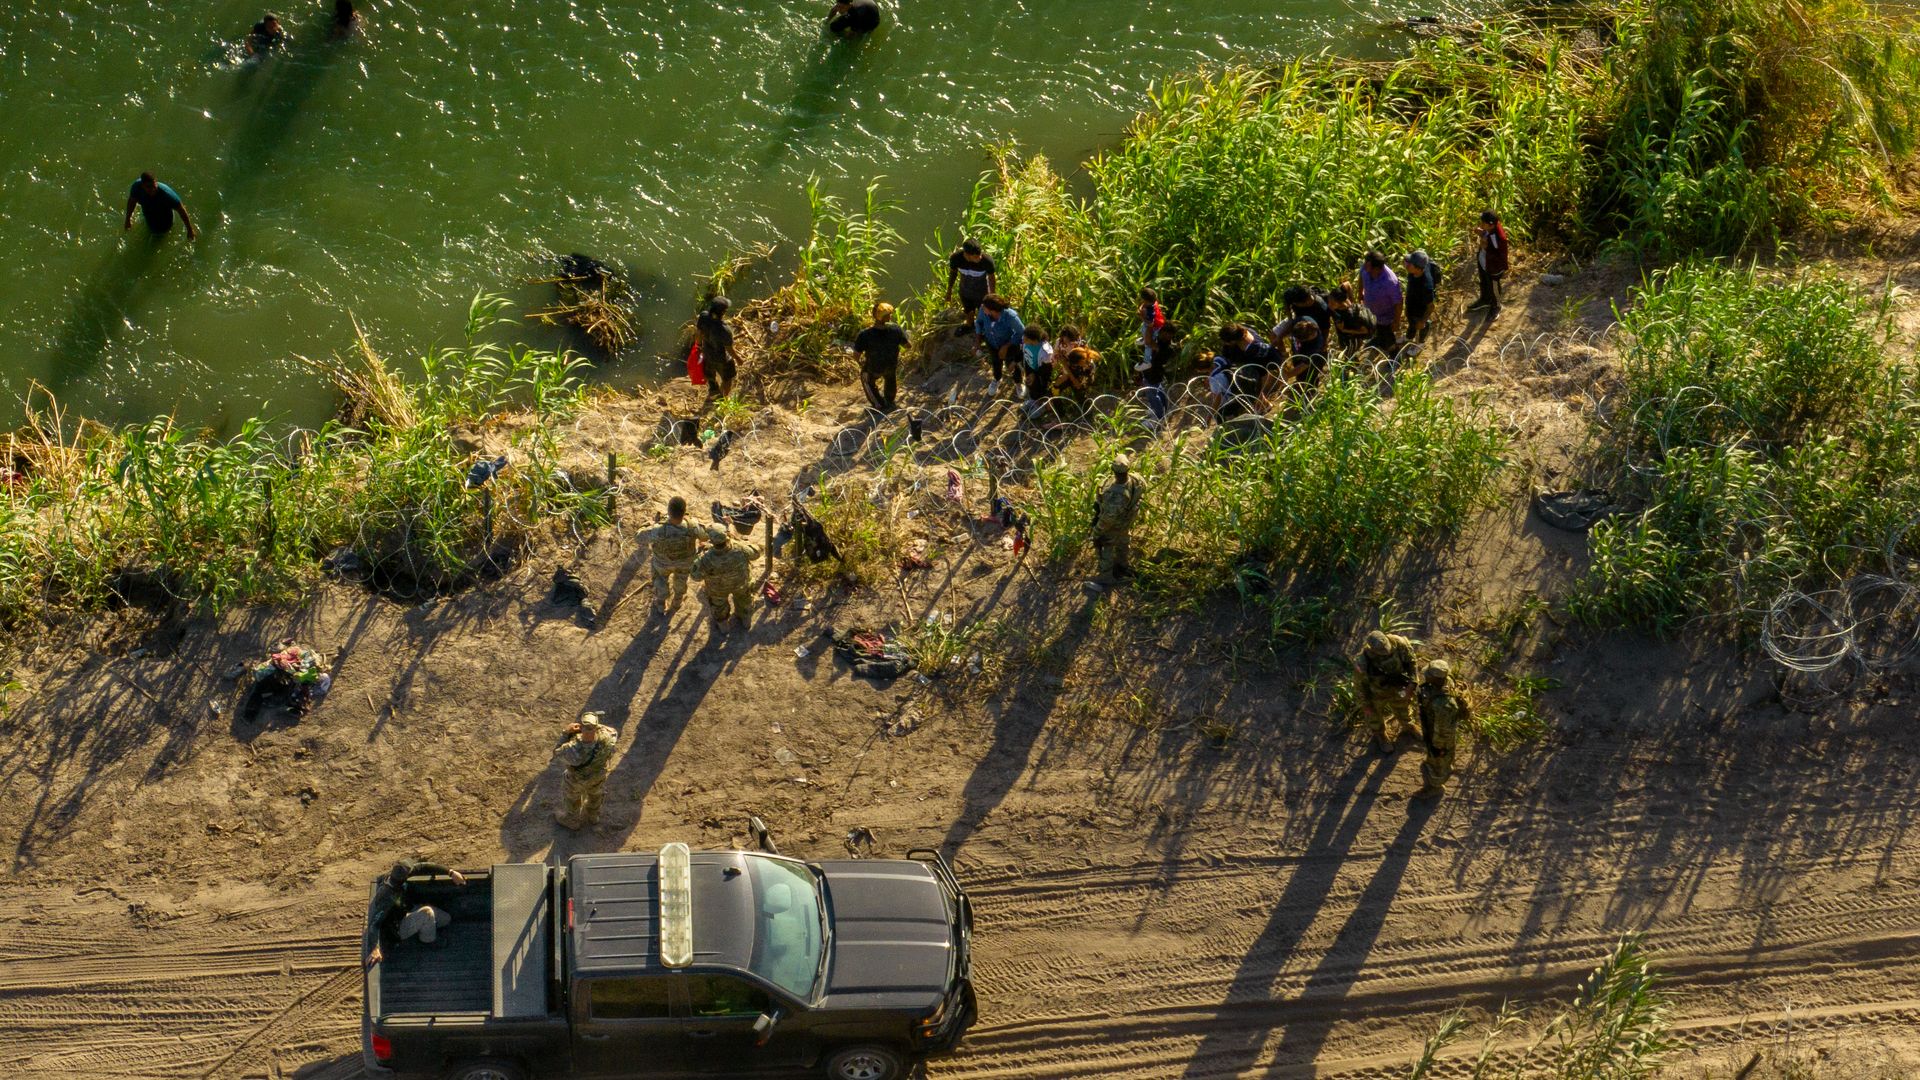  In an aerial view, migrants seeking asylum receive instructions from law enforcement officers after crossing the Rio Grande river into the United States 